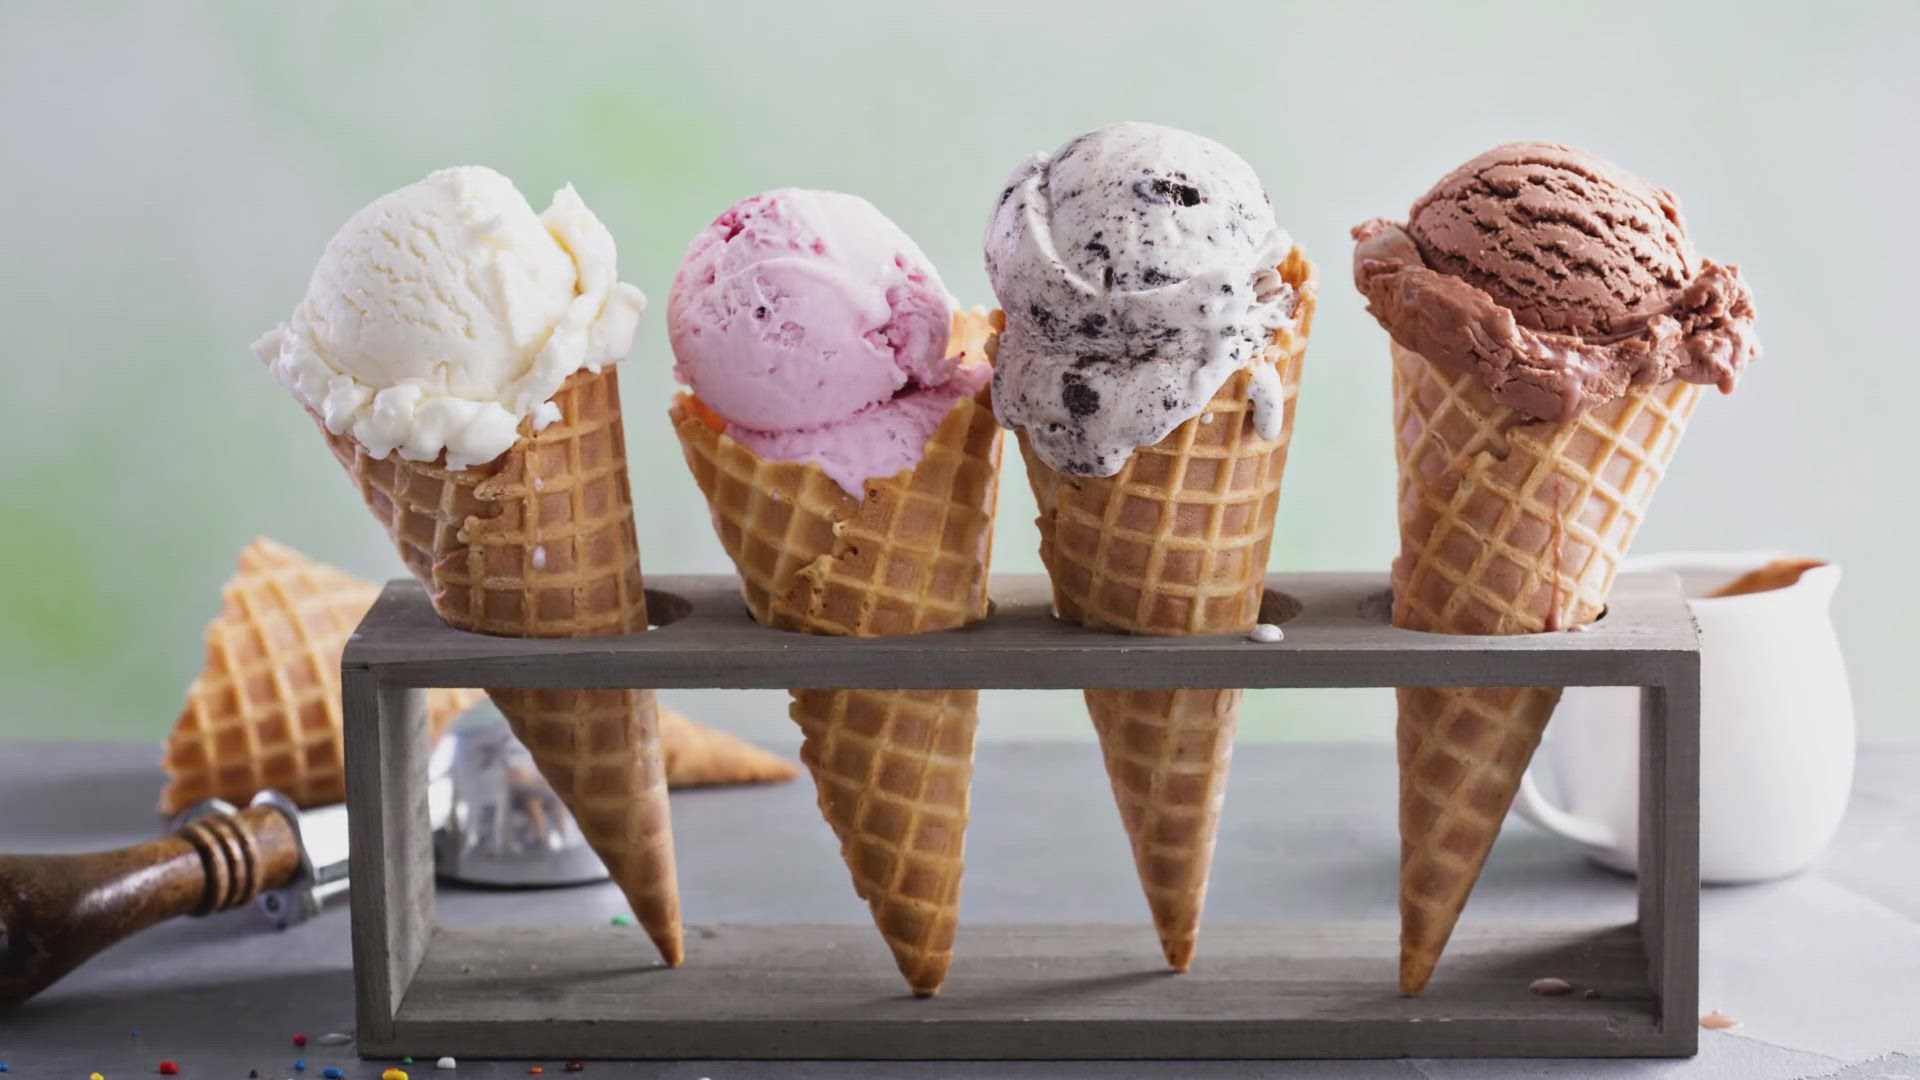 Several Maine ice cream shops offer free ice cream scoop to any child who can recite the Pledge of Allegiance in celebration of Independence Day.